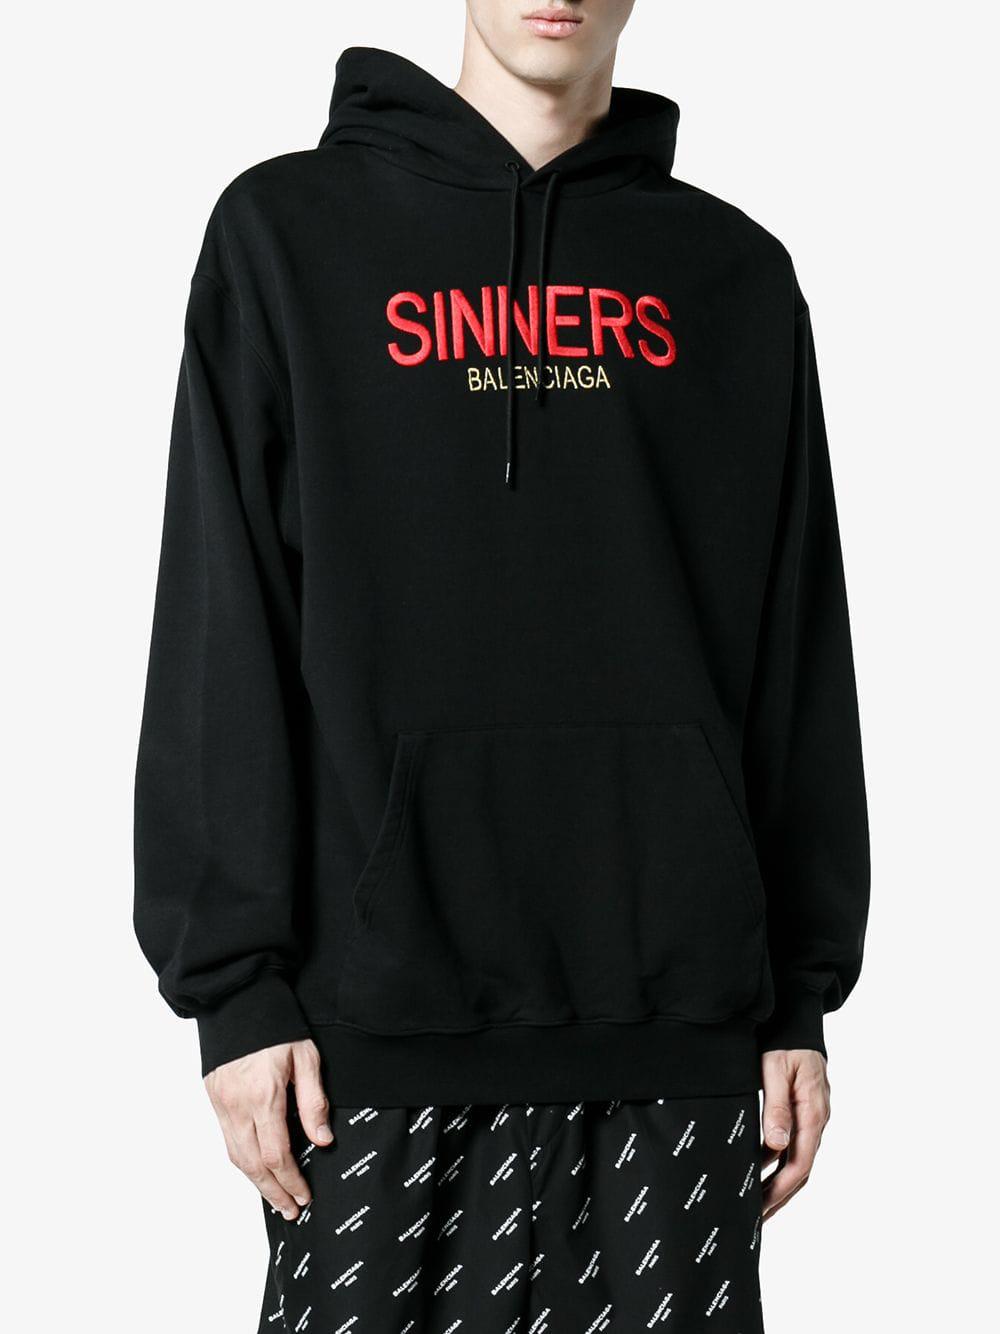 sinners balenciaga hoodie fake, big discount Save 63% available -  statehouse.gov.sl